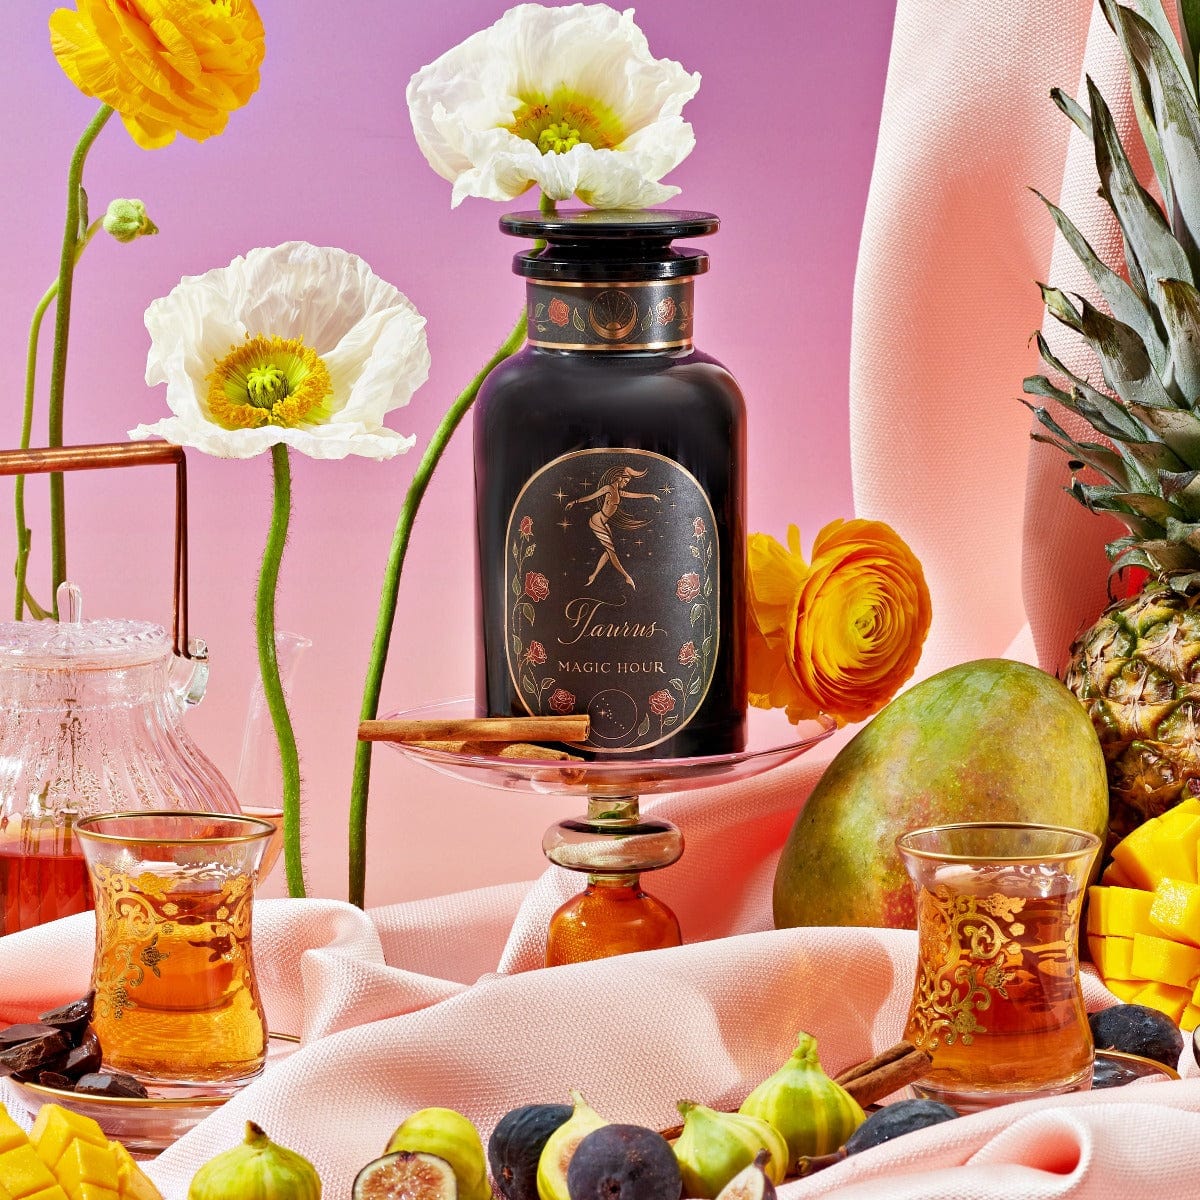 A decorative bottle labeled &quot;Taurus: Tea of Venusian Garden Delights&quot; from Magic Hour is surrounded by vibrant yellow and white flowers, fresh fruit including pineapple, mango, and figs, with a pink and purple gradient background. Two ornate glasses with amber liquid from the Magic Hour collection are placed in the foreground.